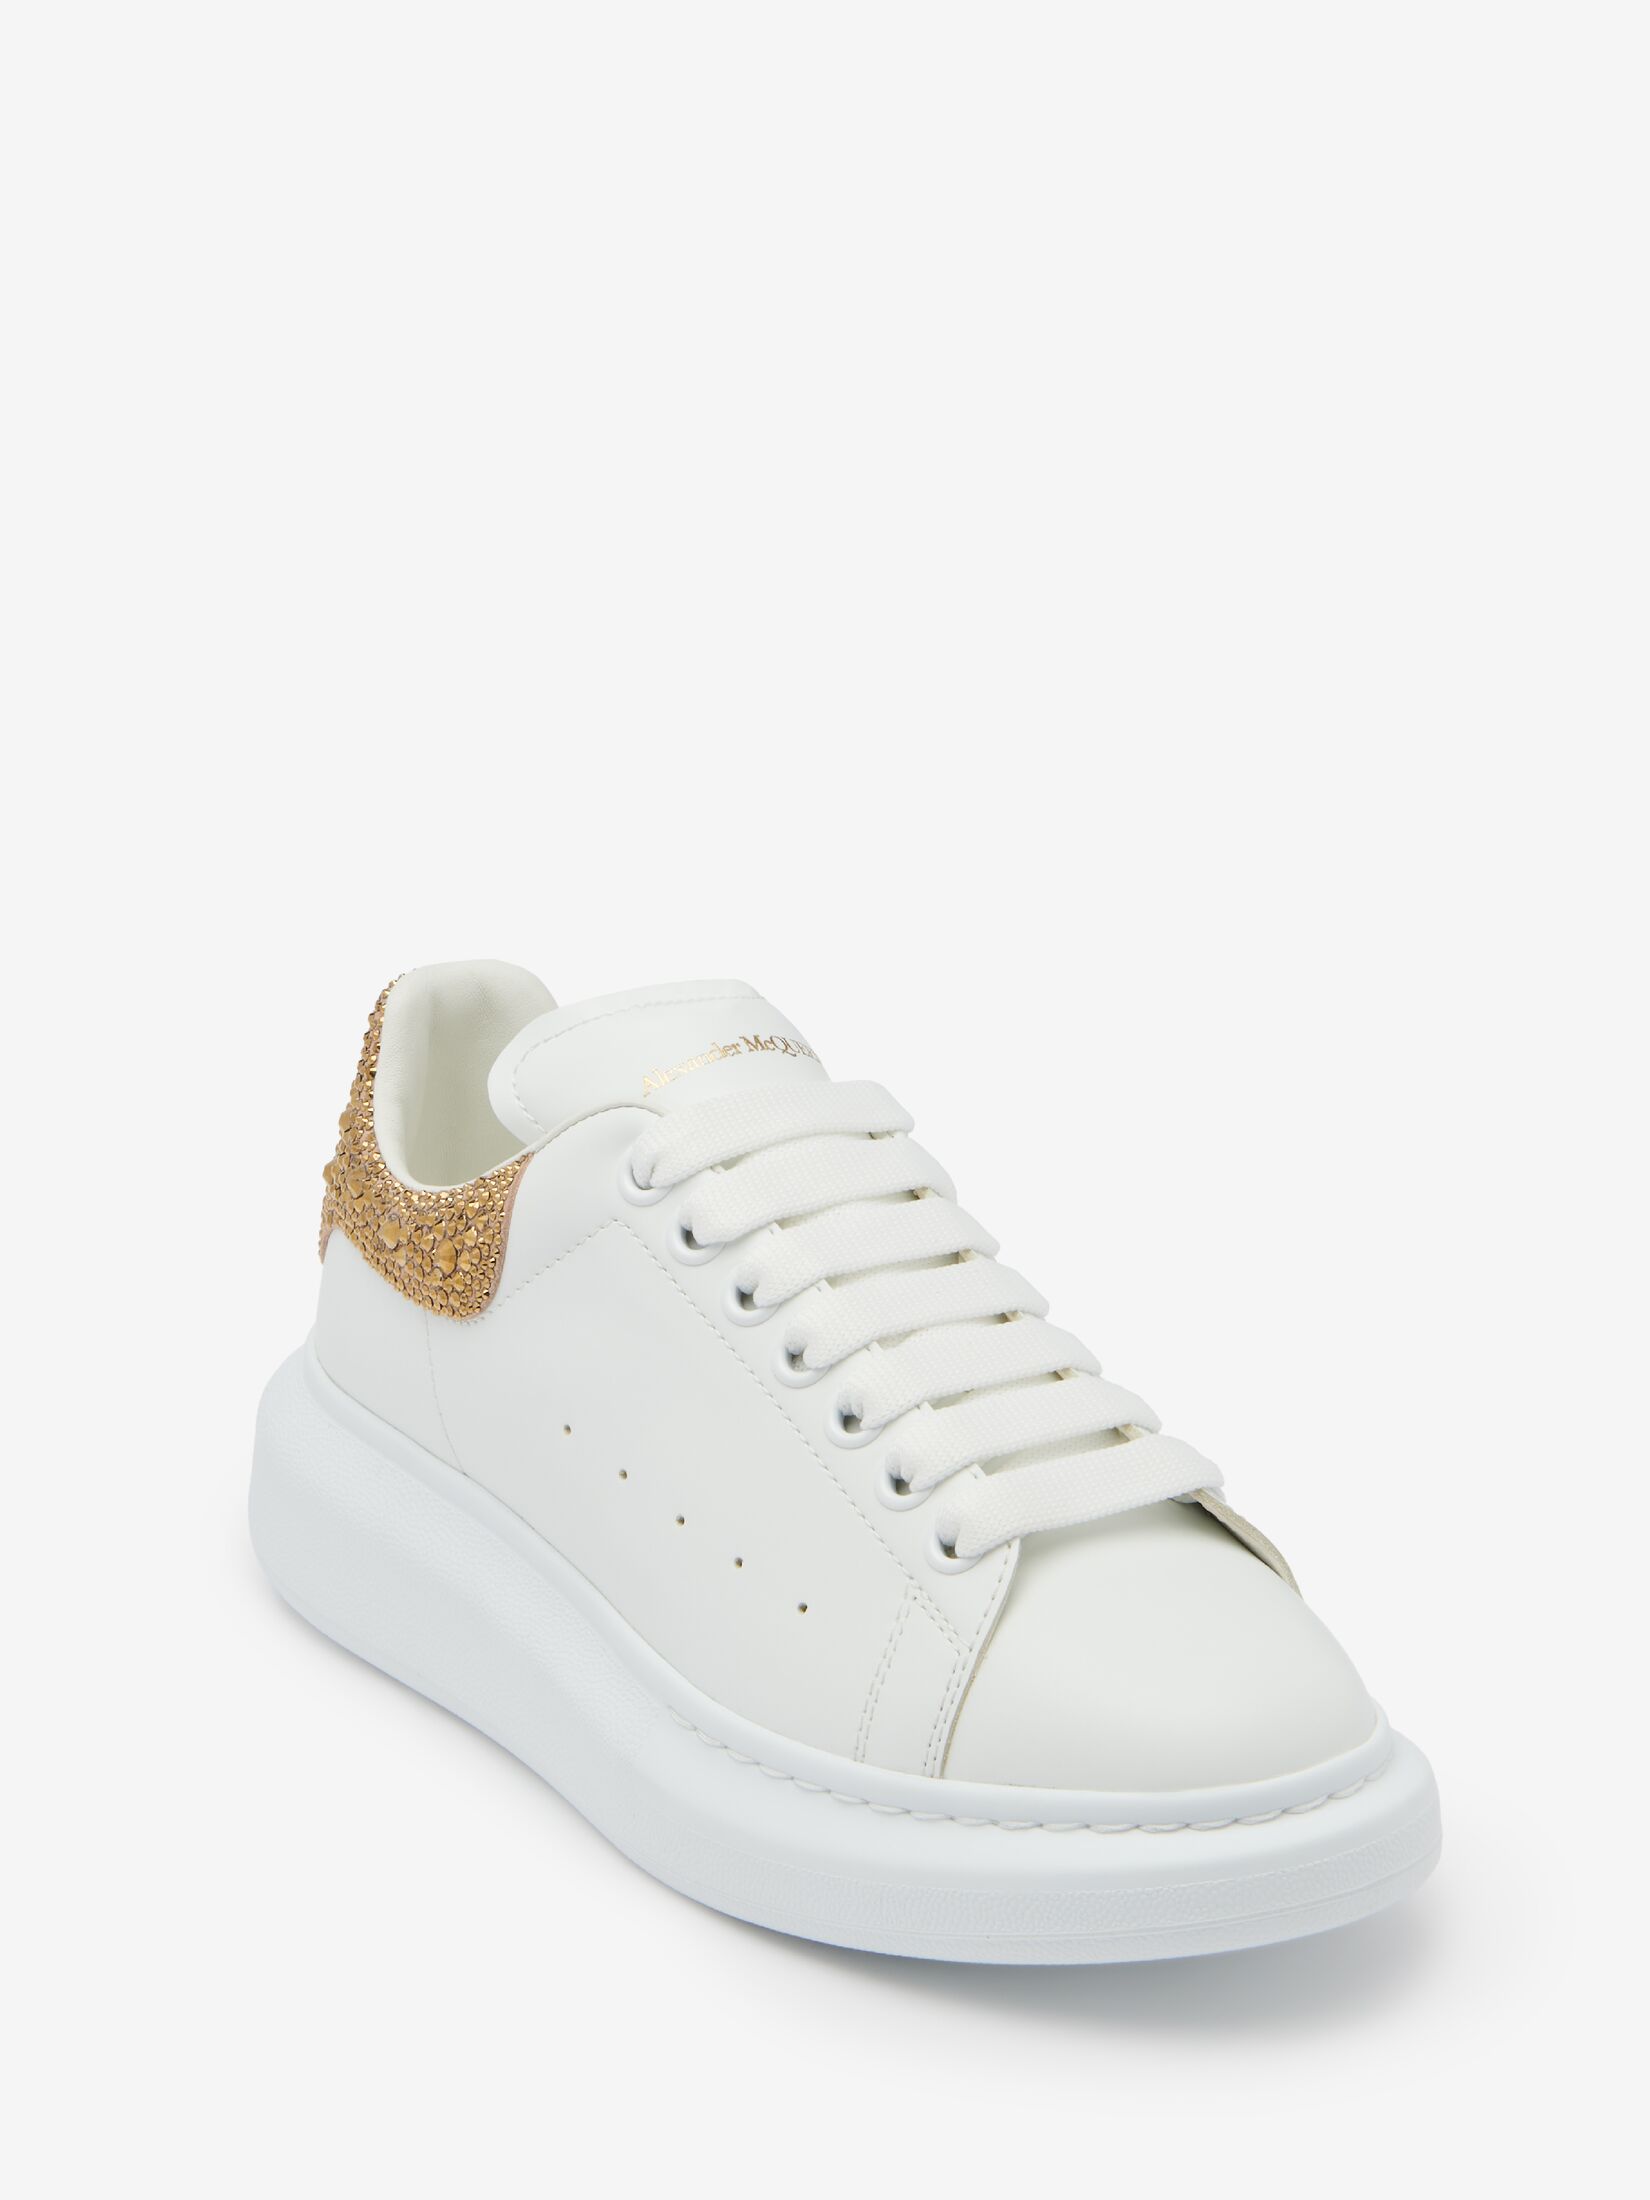 Alexander McQueen Oversized Quilted White